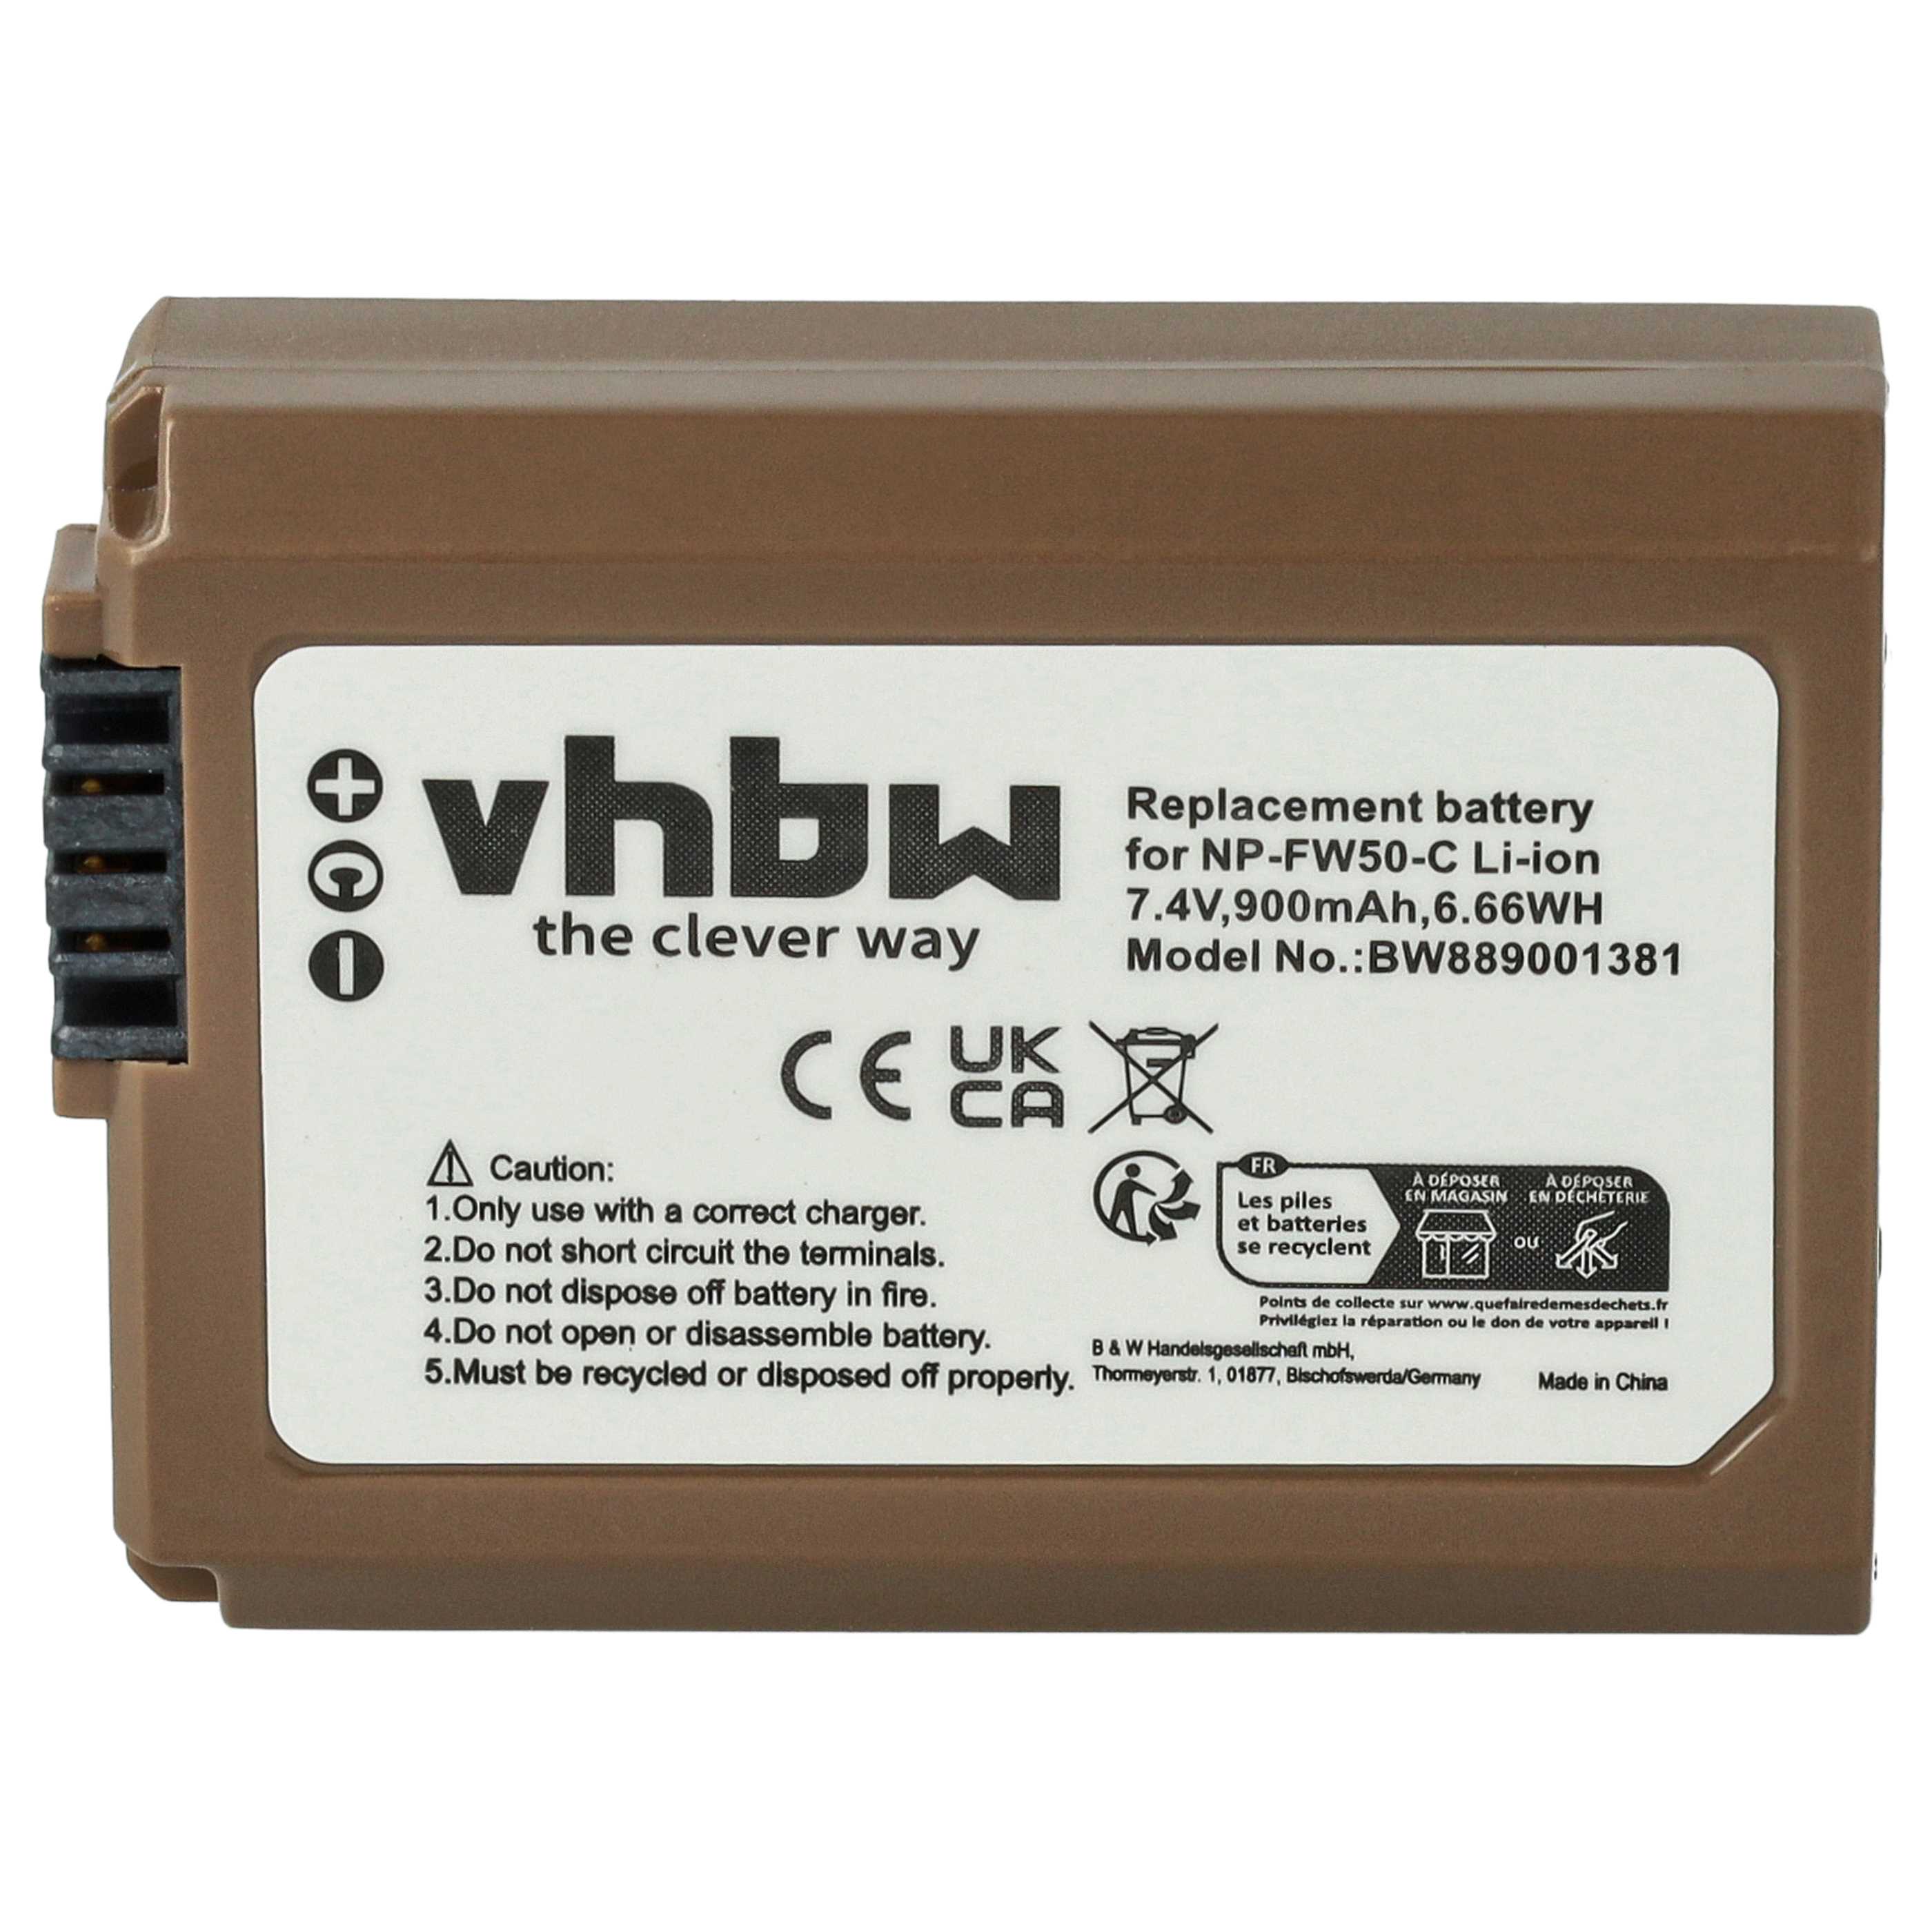 Battery Replacement for Sony NP-FW50 - 900mAh, 7.4V, Li-Ion with Info Chip, with USB C Socket